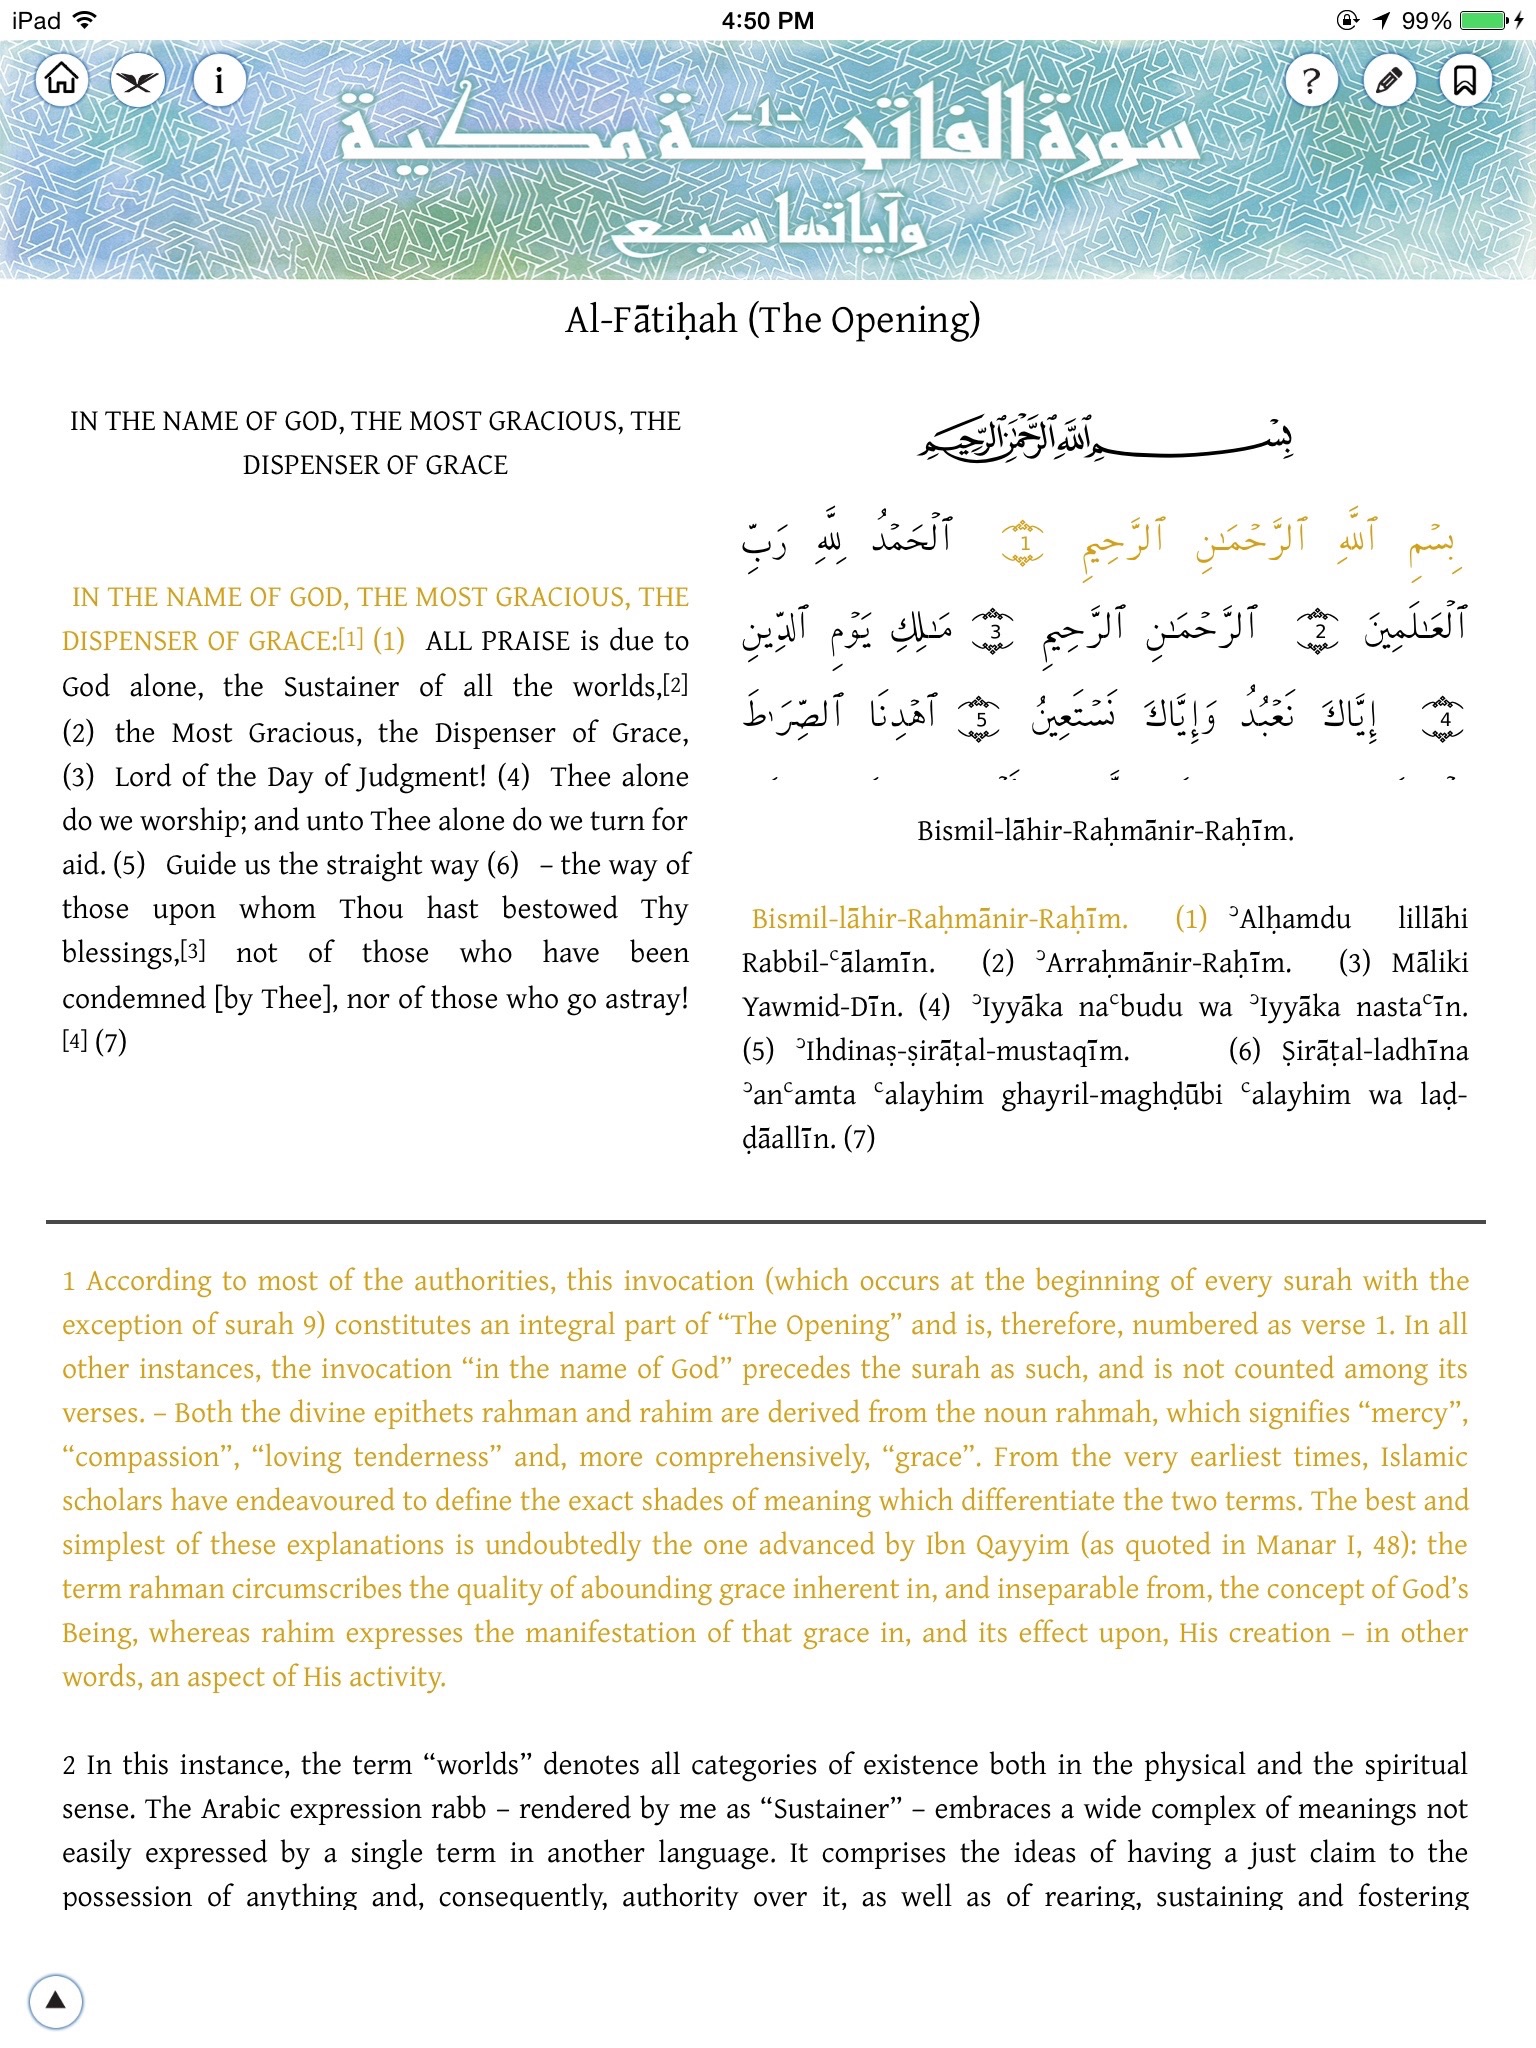 Message of the Quran Lite- Muhammad Asad's monumental translation and commentary screenshot 3